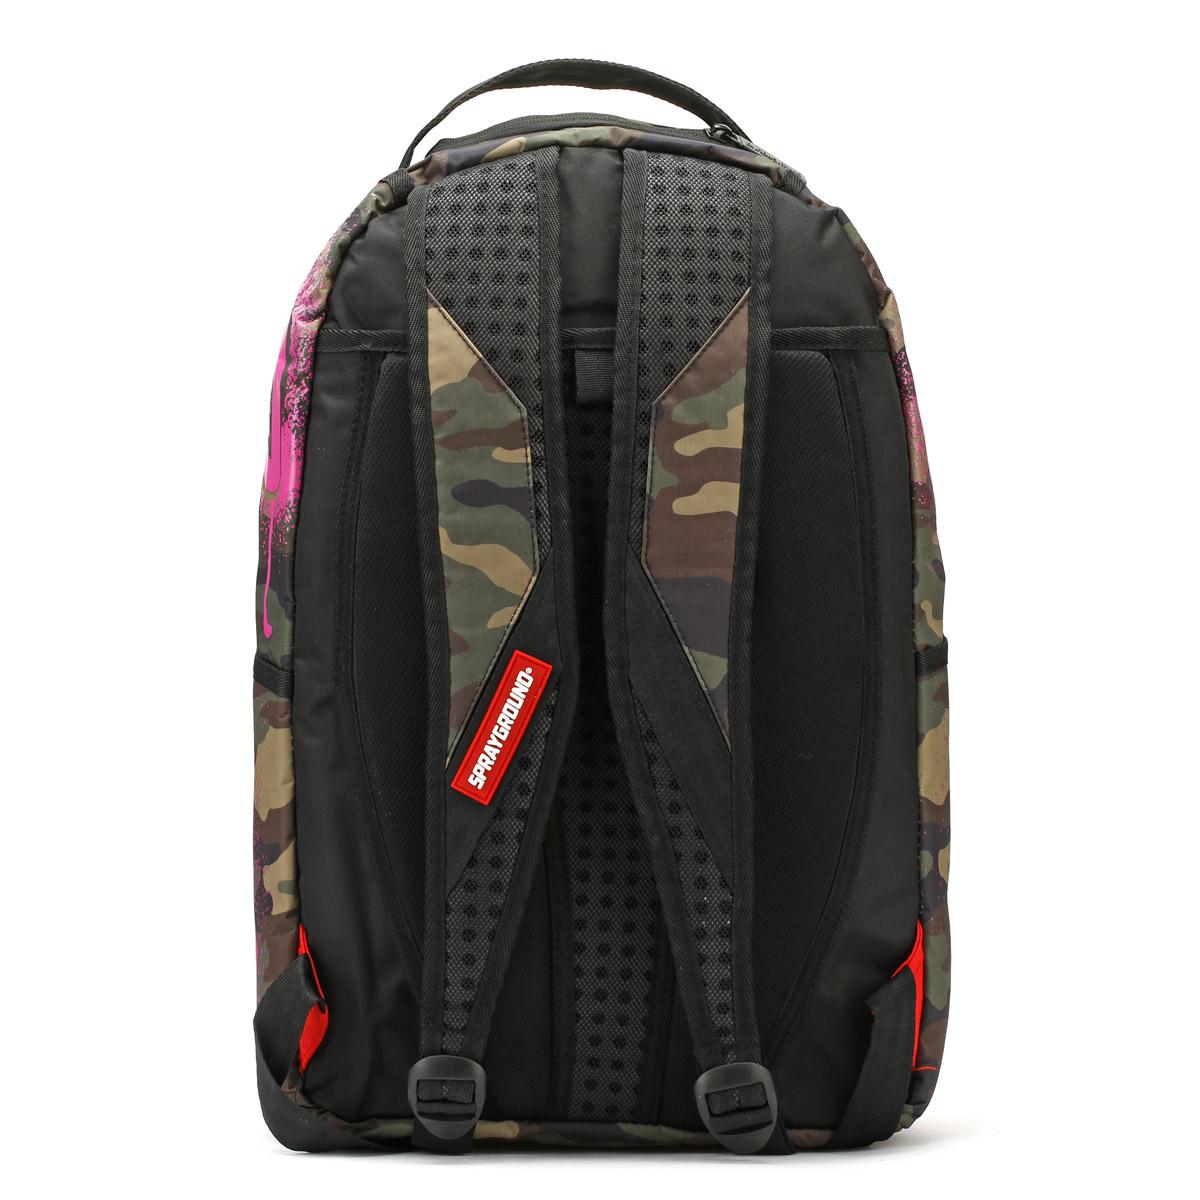 Sprayground Synthetic Pink Stencil Camo Shark Backpack - Lyst